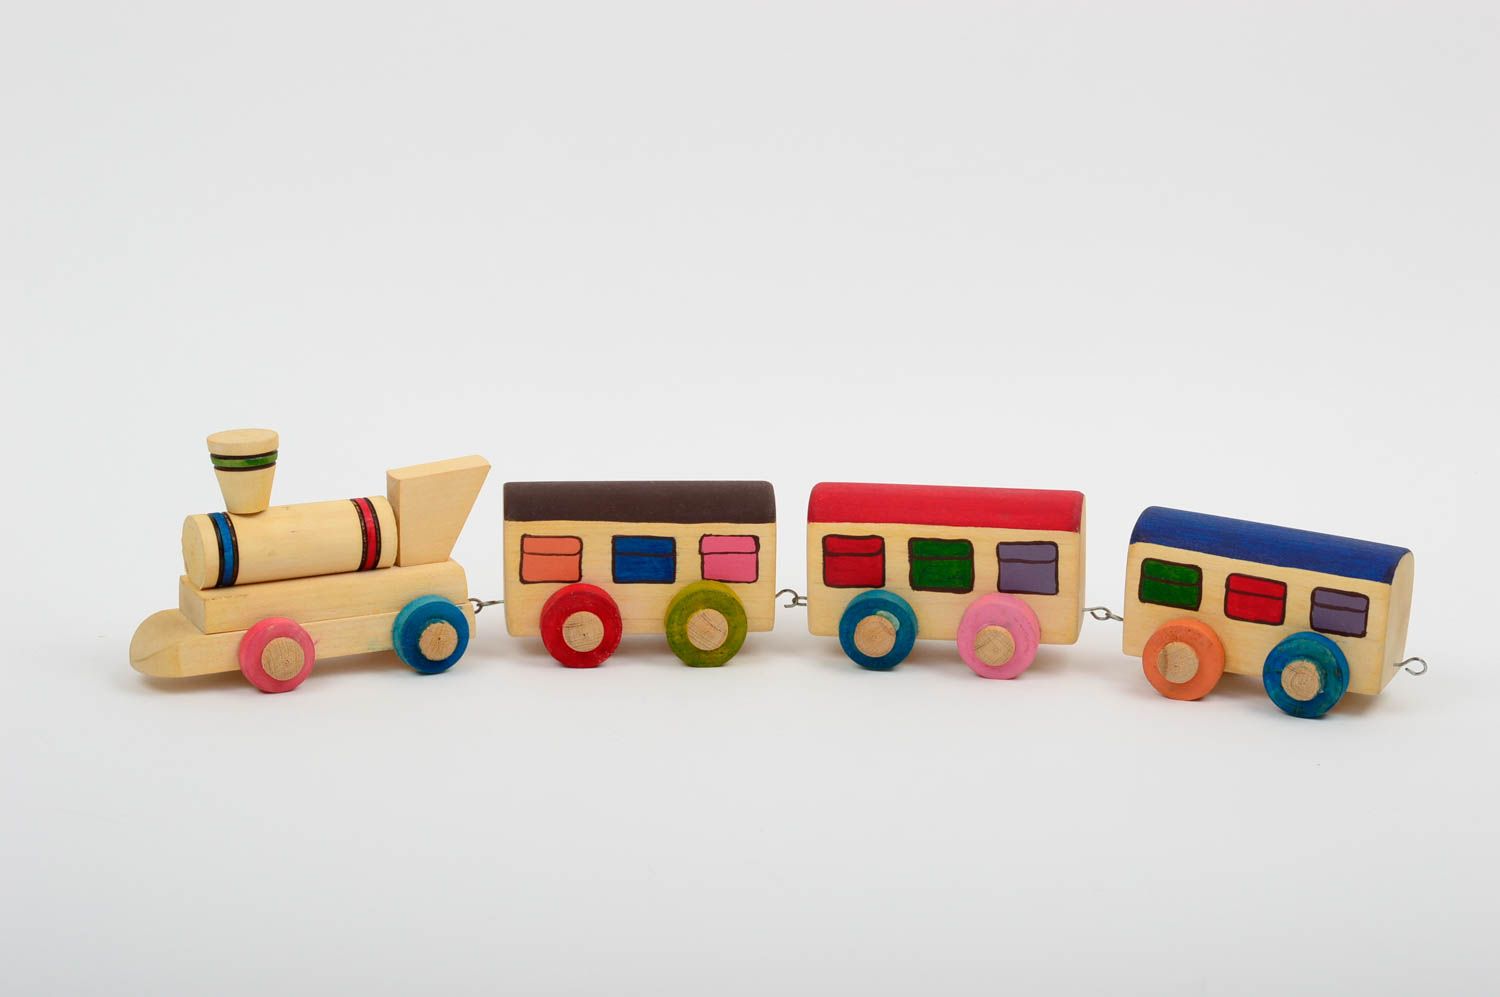 Wooden toy train handmade toy wooden toys for kids gifts for baby boy home decor photo 1